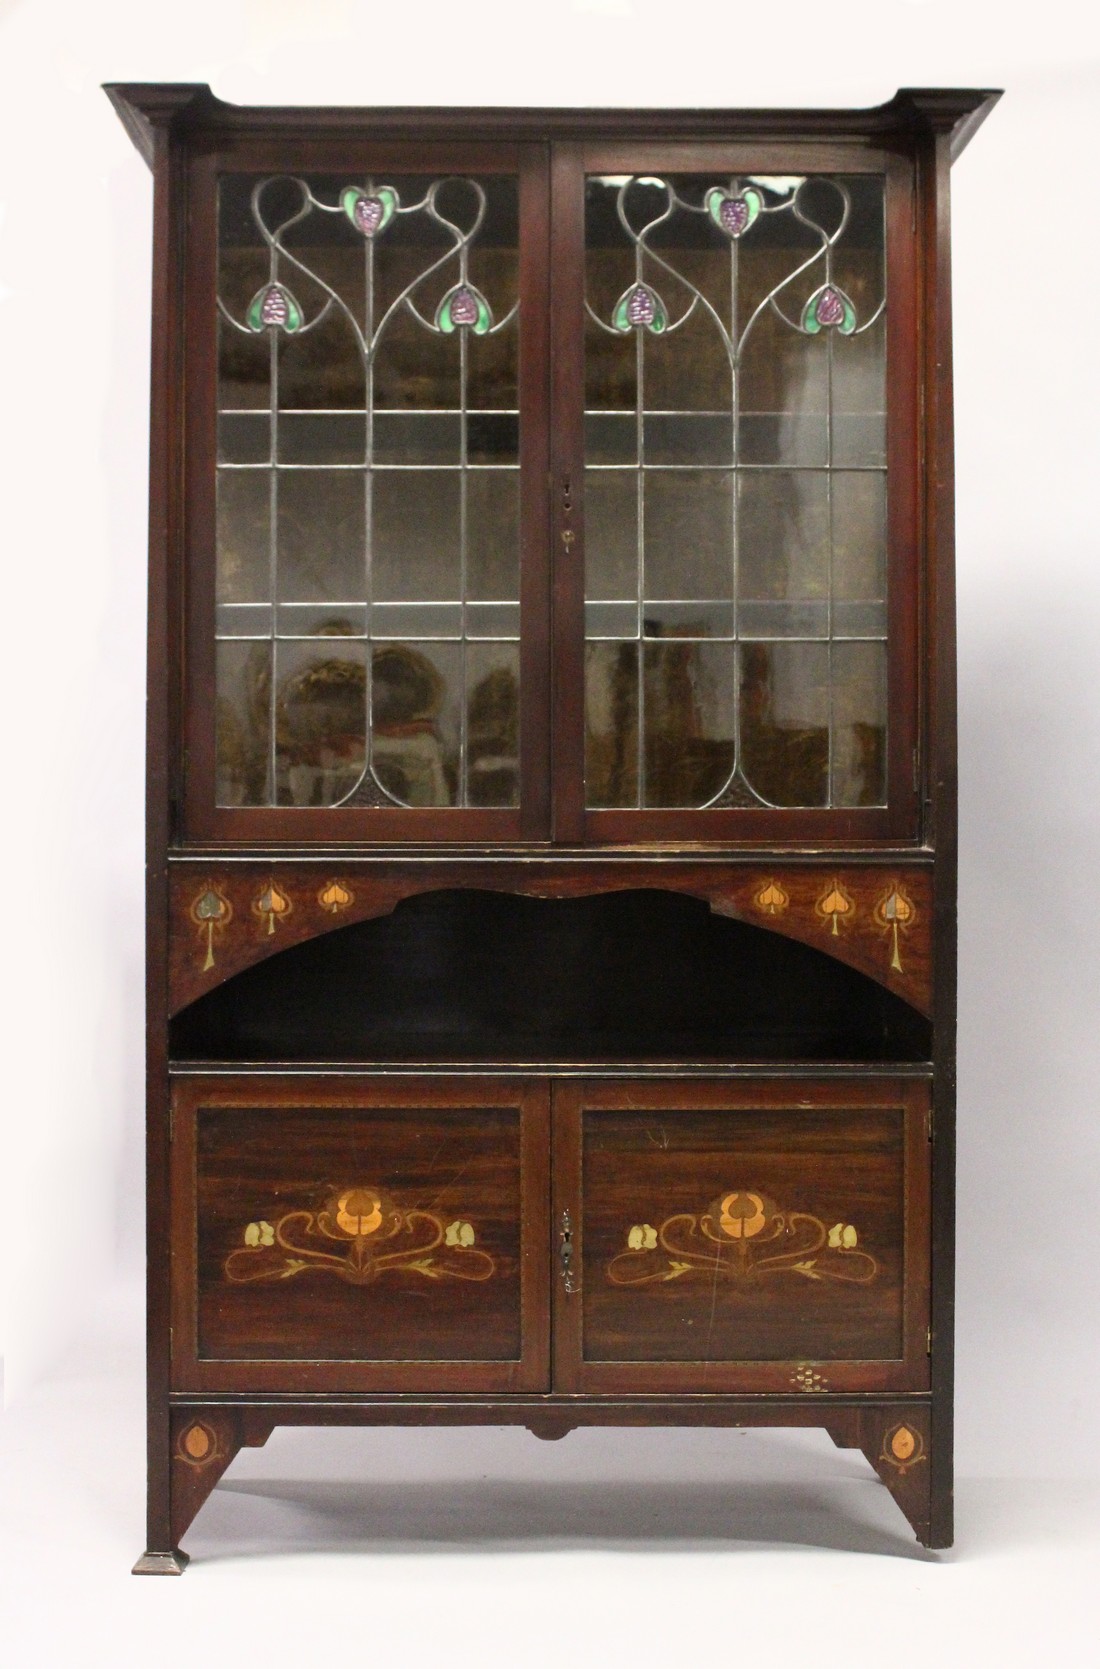 AN ART NOUVEAU MAHOGANY INLAID CHINA CABINET with a pair of leaded glass doors over an open space, - Image 2 of 6